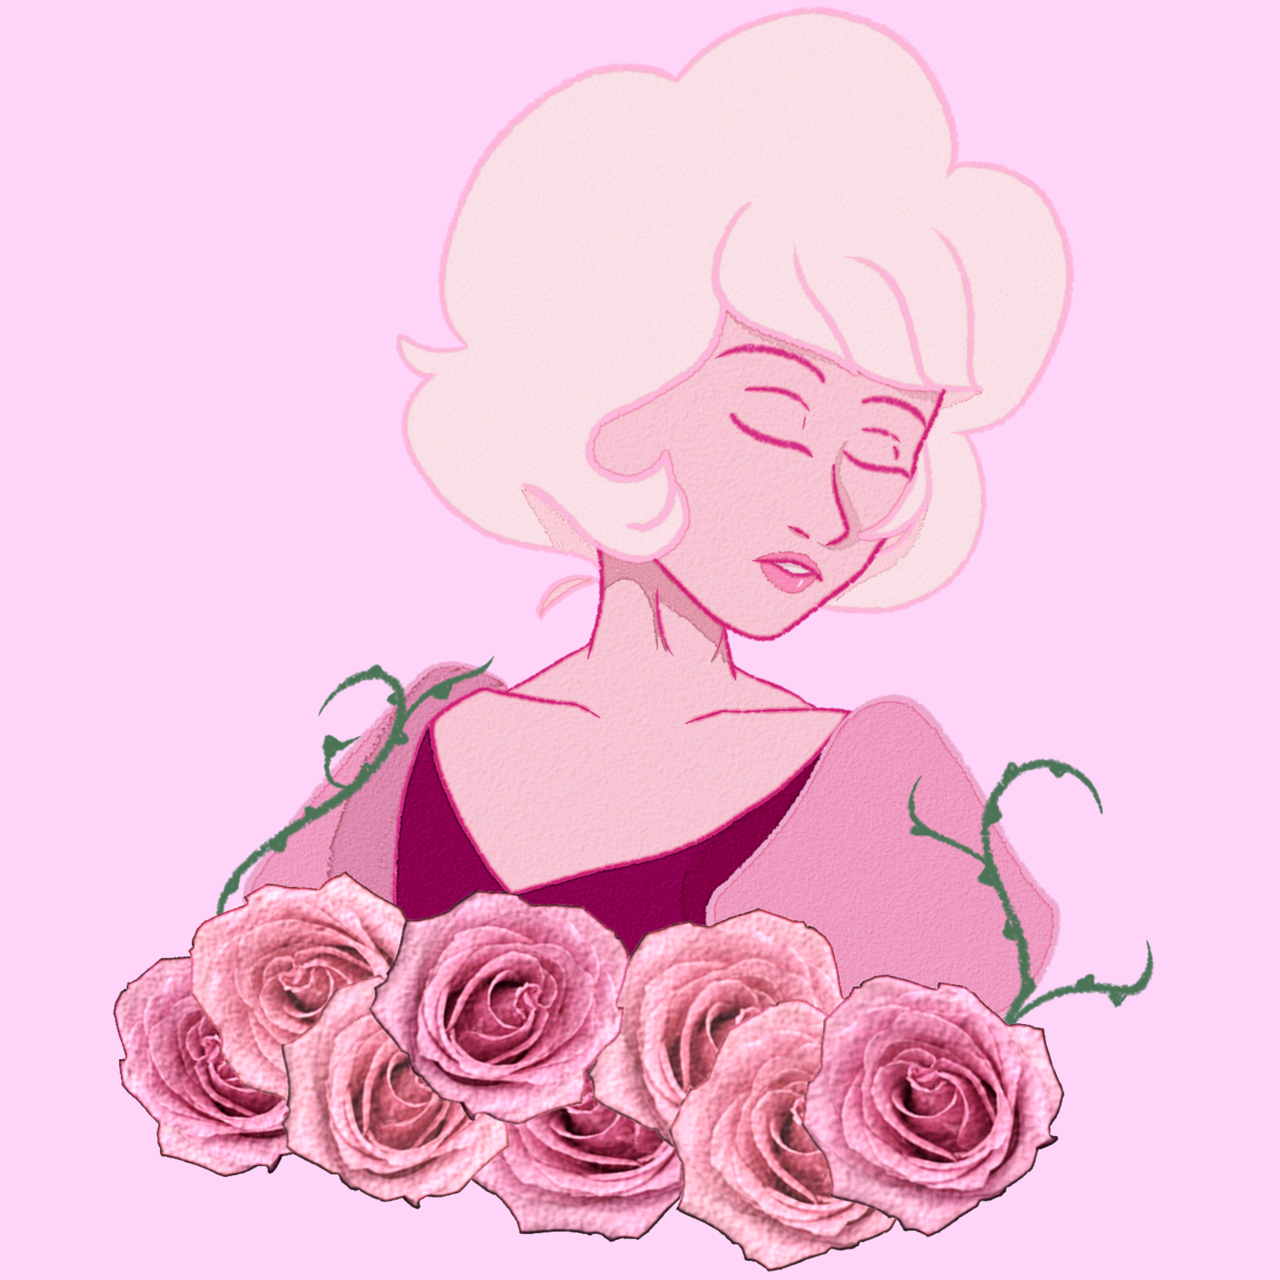 “ Even though the flower is so very refined The thorns had driven it’s garden to decline. ” I LOVE PD. I mean, she’s pink and voiced by Susan Egan and shes also —— (i cant say my girl kenn isnt caught...